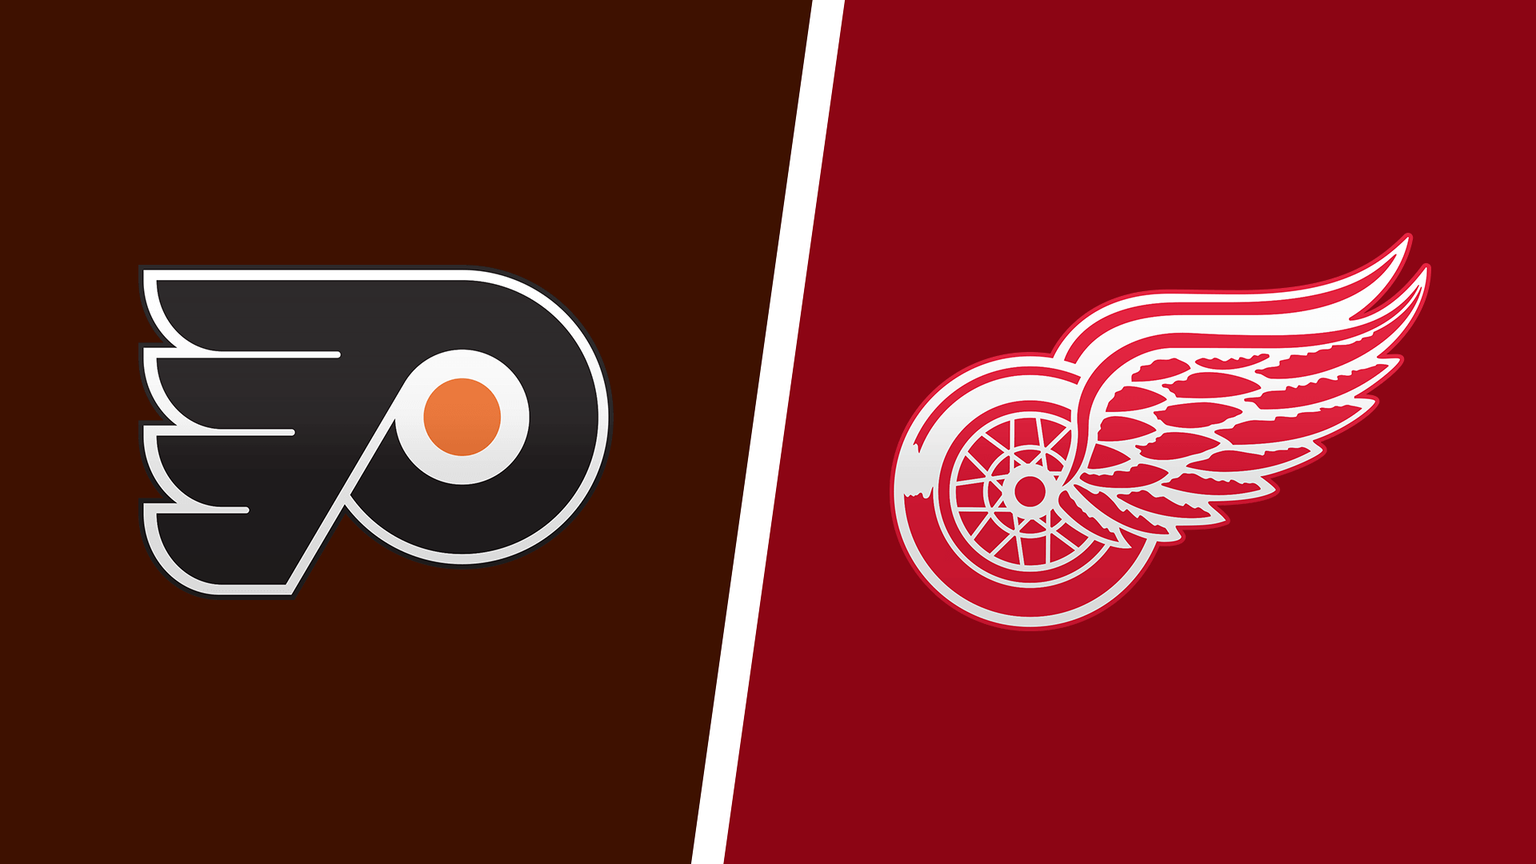 How to Watch Detroit Red Wings vs. Philadelphia Flyers Game Live Online